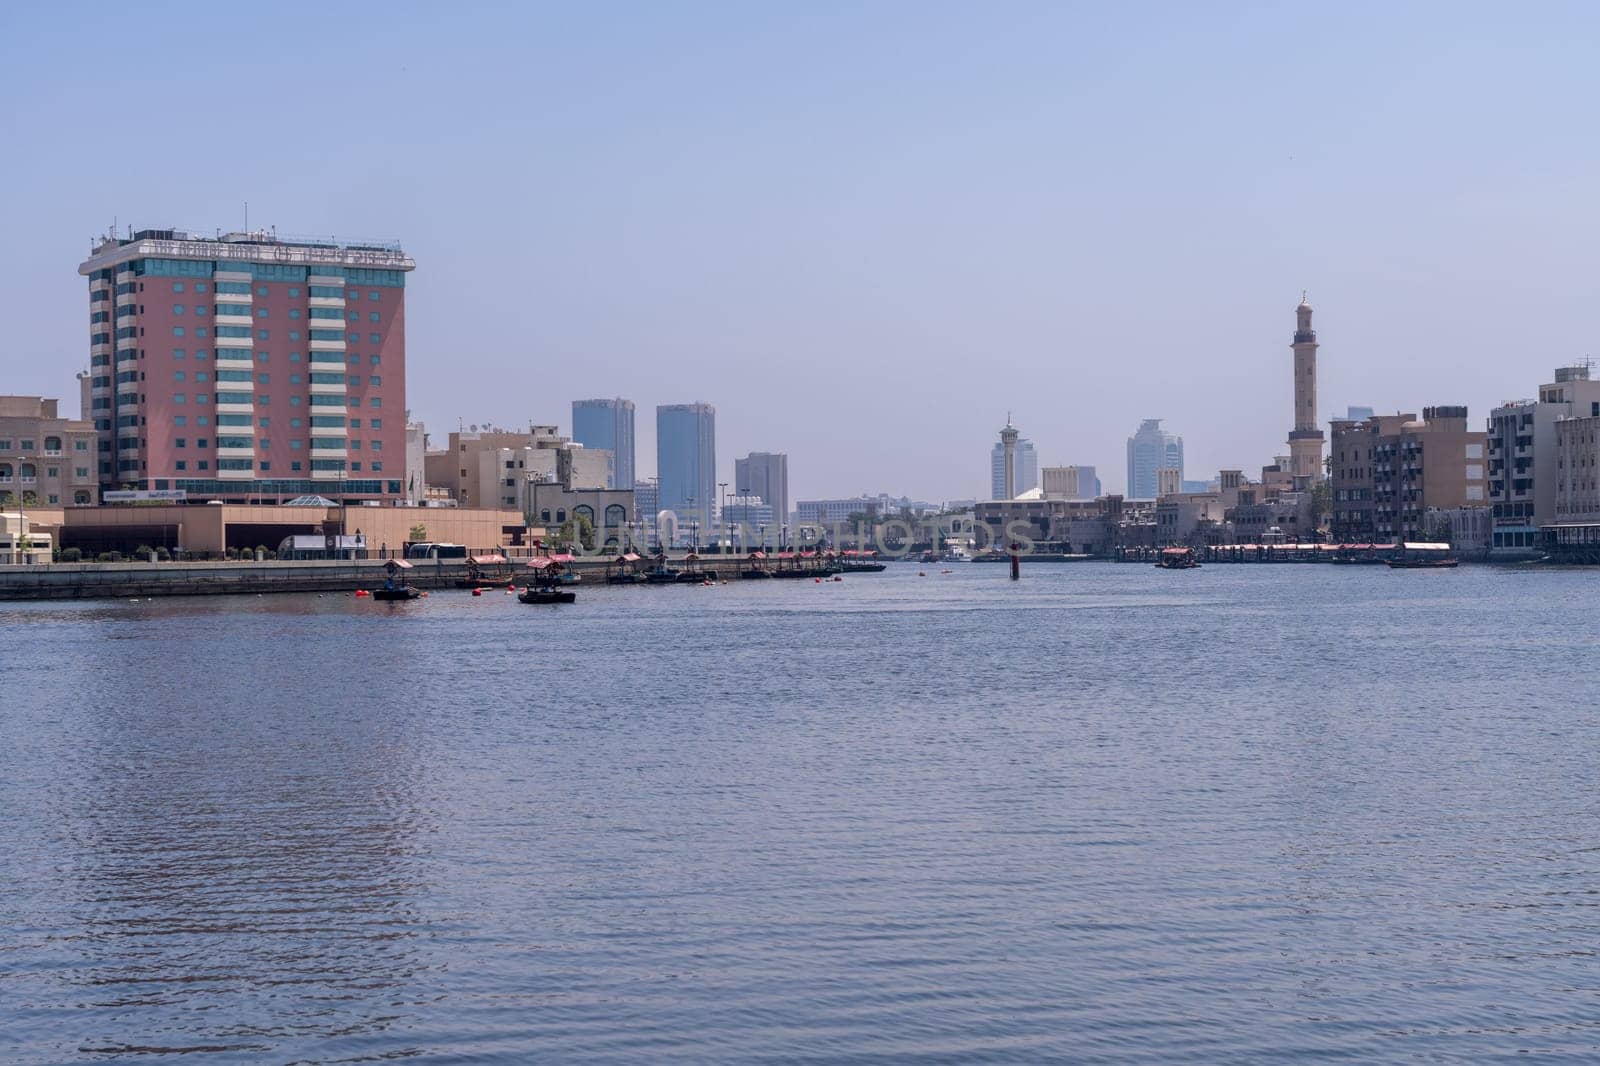 Dubai, UAE - 31 March 2023: The Creek from Bur Dubai to Deira with traditional Abra docked on the waterfront